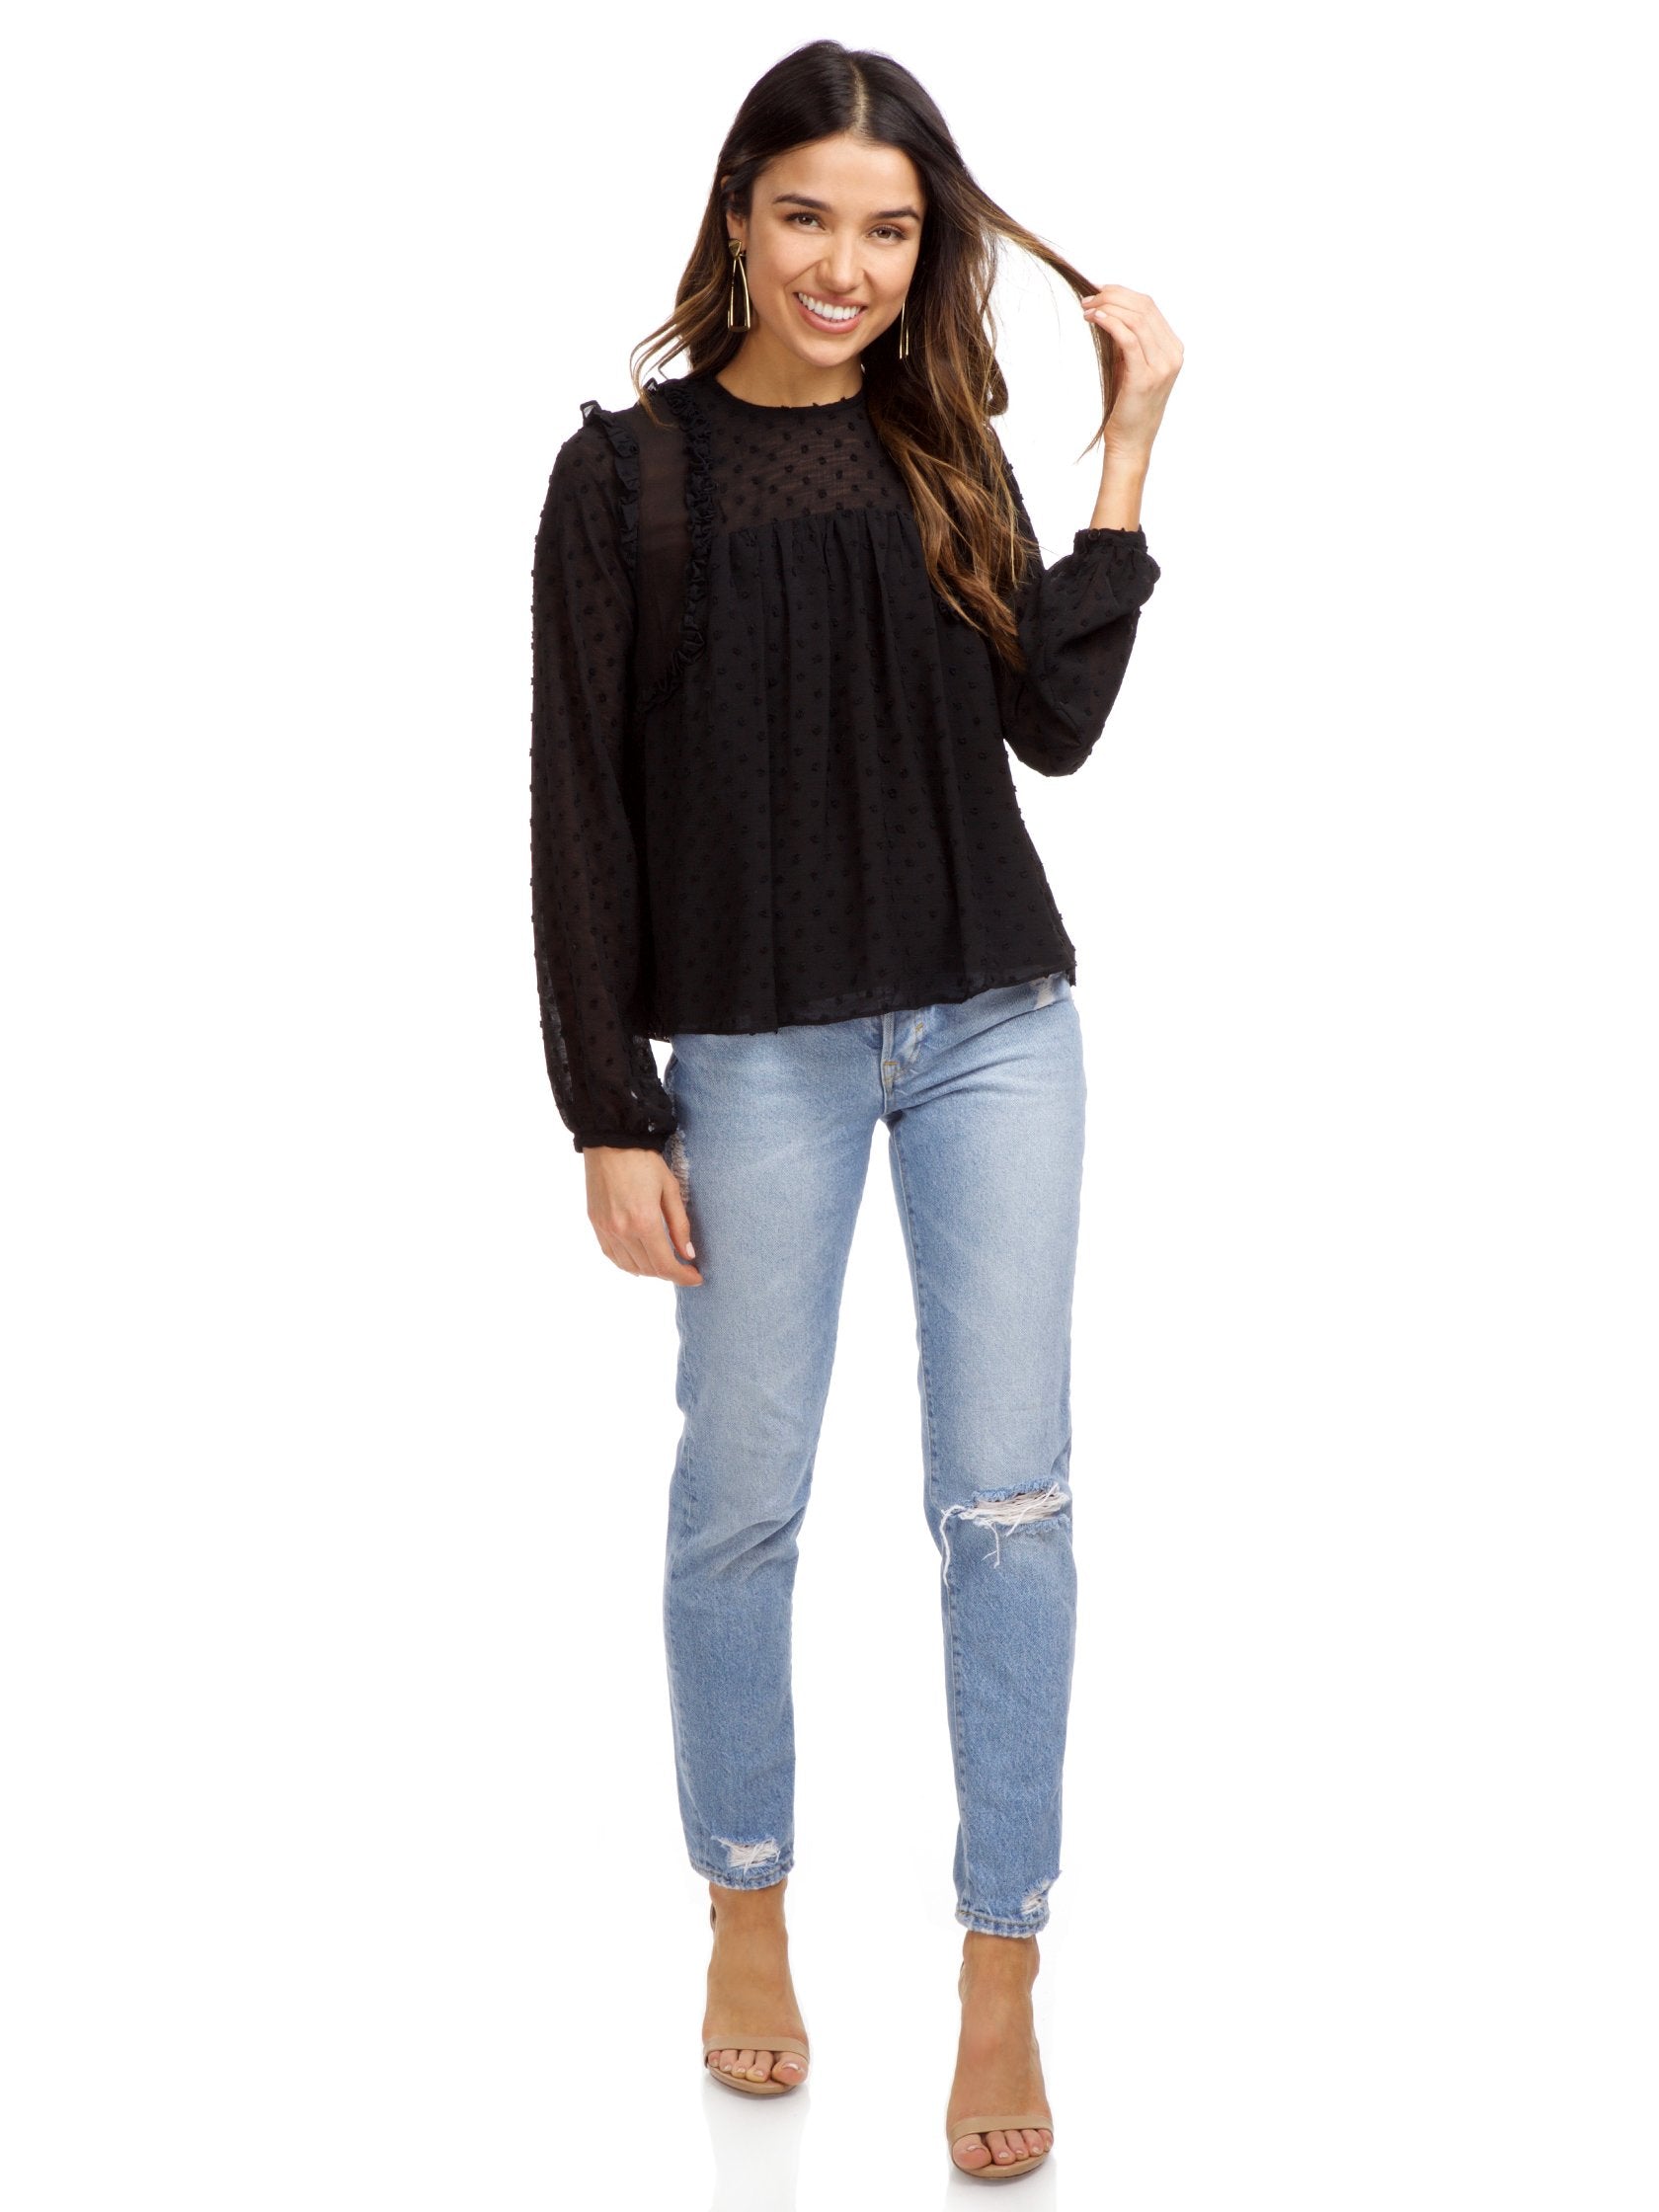 Girl wearing a top rental from Strut & Bolt called Dotted Ruffle Long Sleeve Top